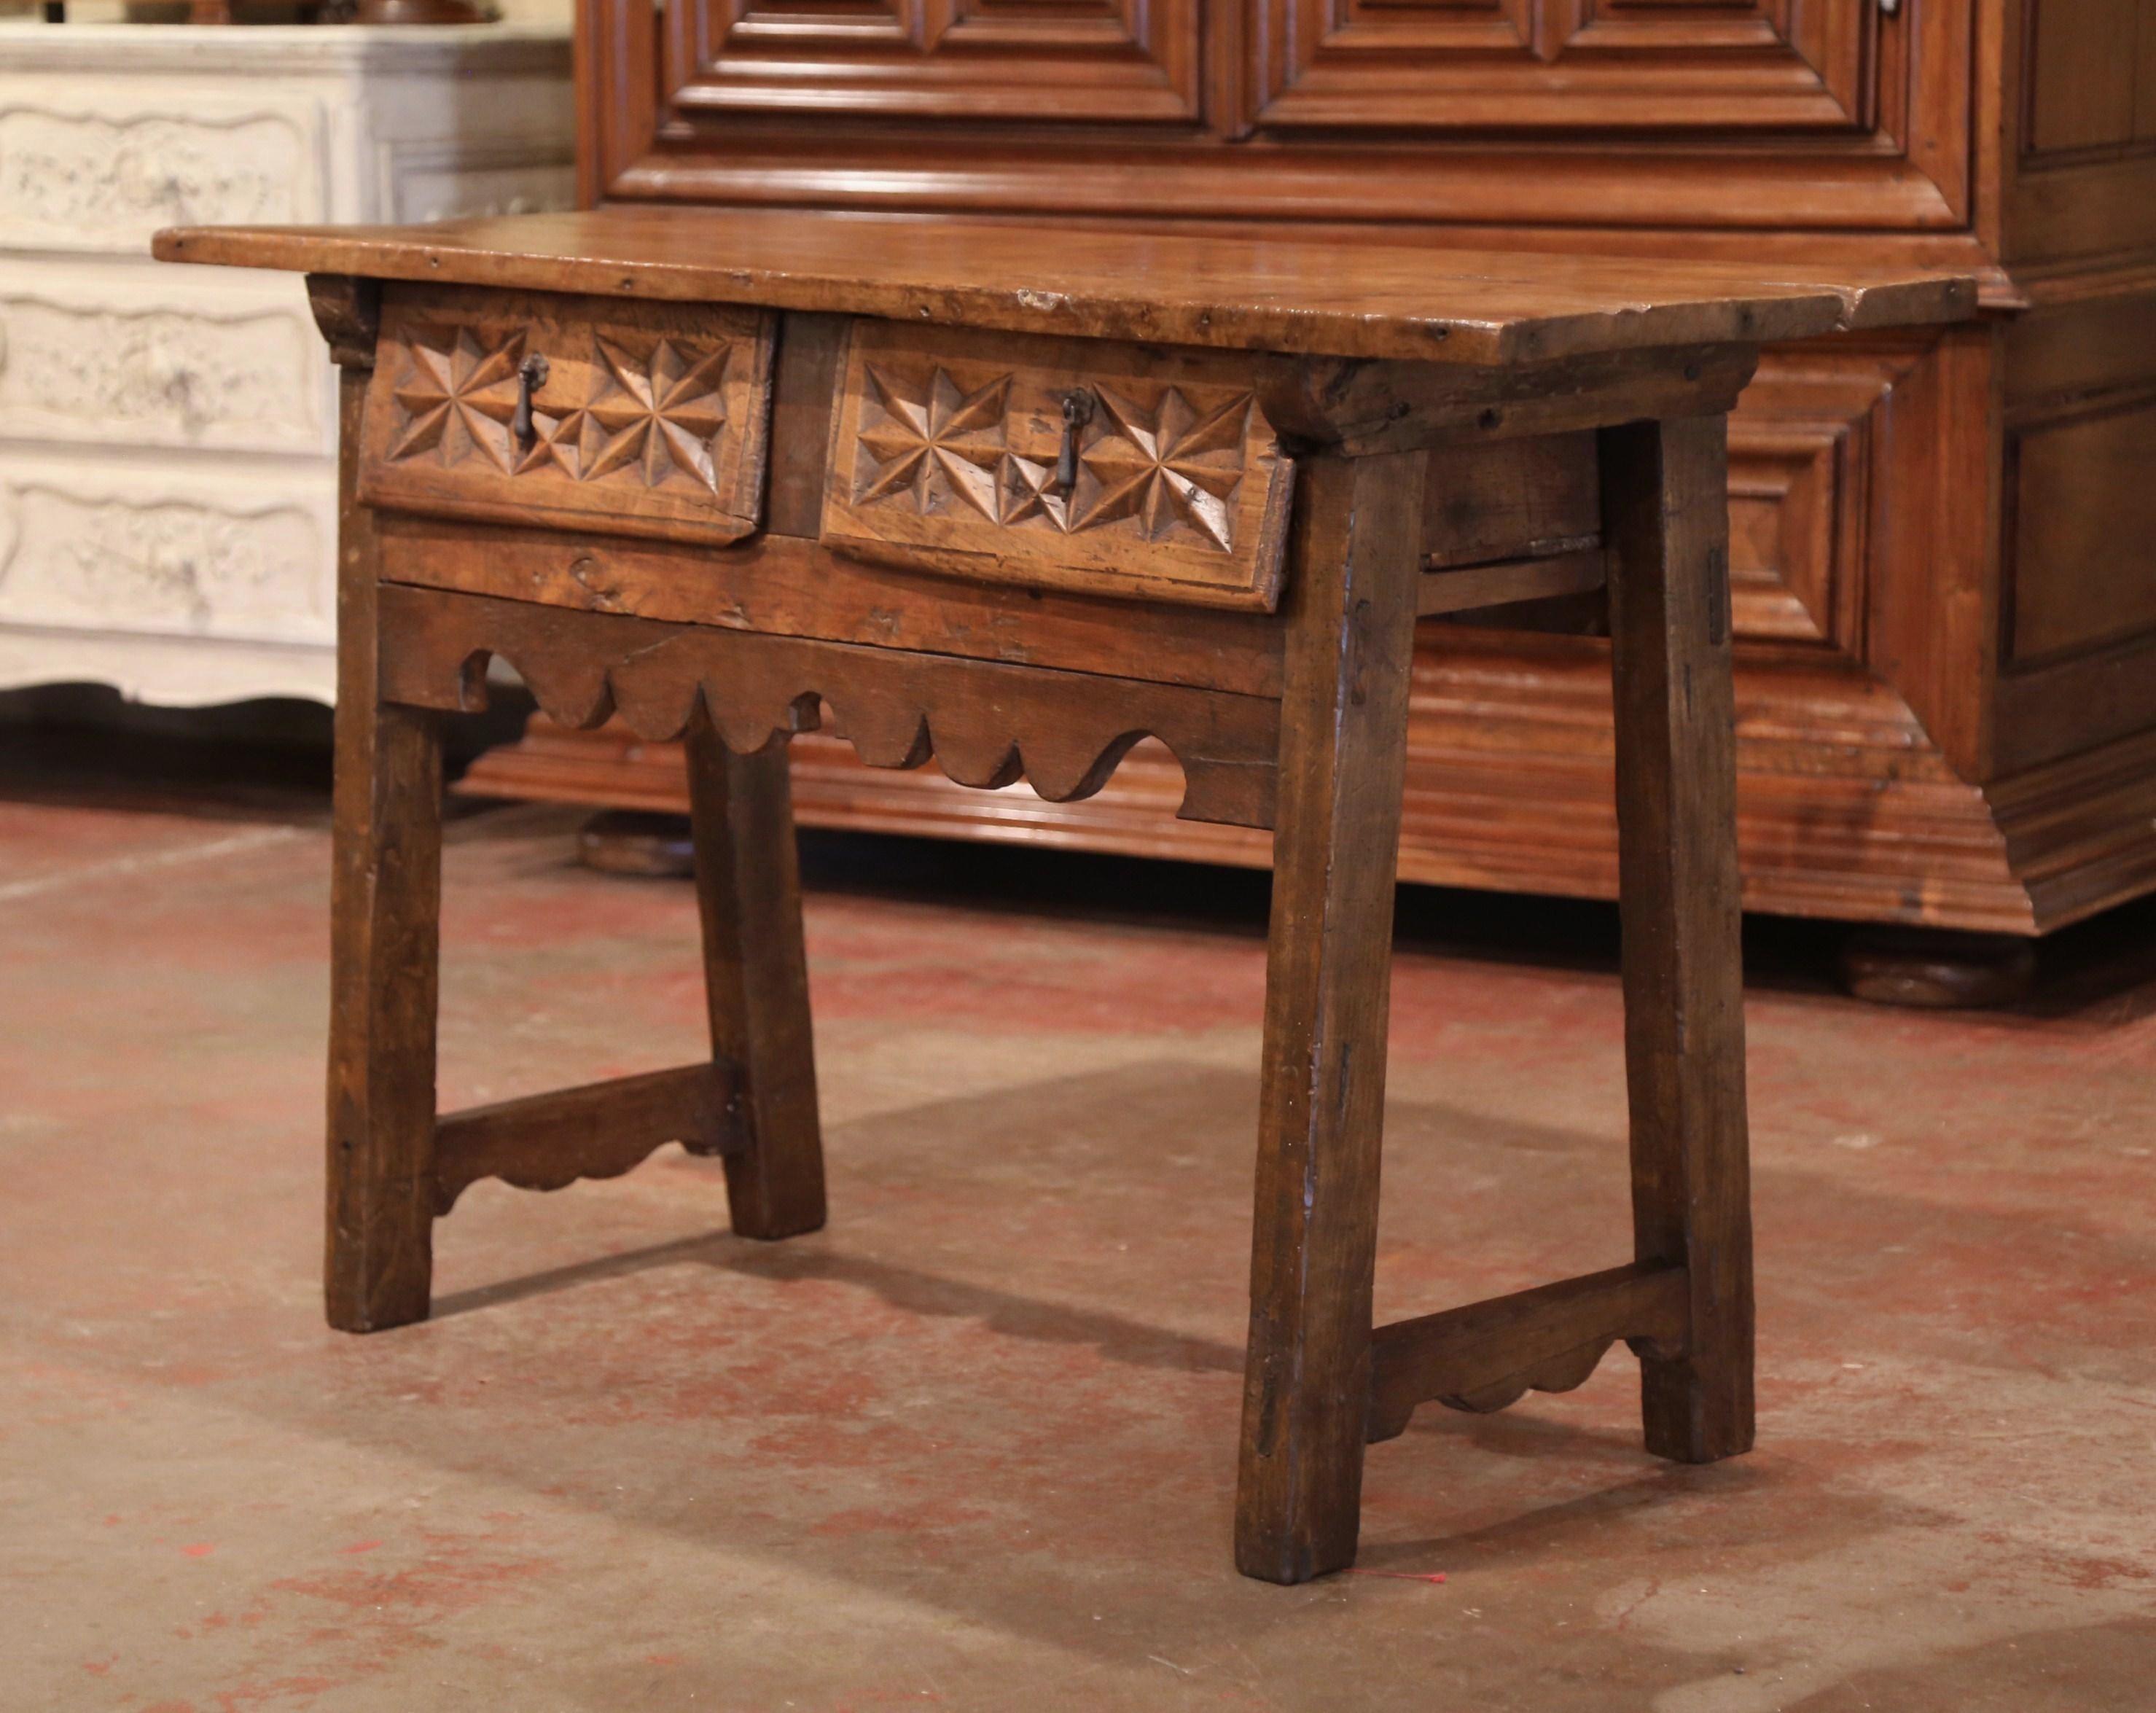 This elegant antique fruitwood console was crafted in Spain, circa 1750. The tall trestle table stands on four square slant legs over a scalloped front apron, the console features a pair of carved drawers across the front, decorated with geometric